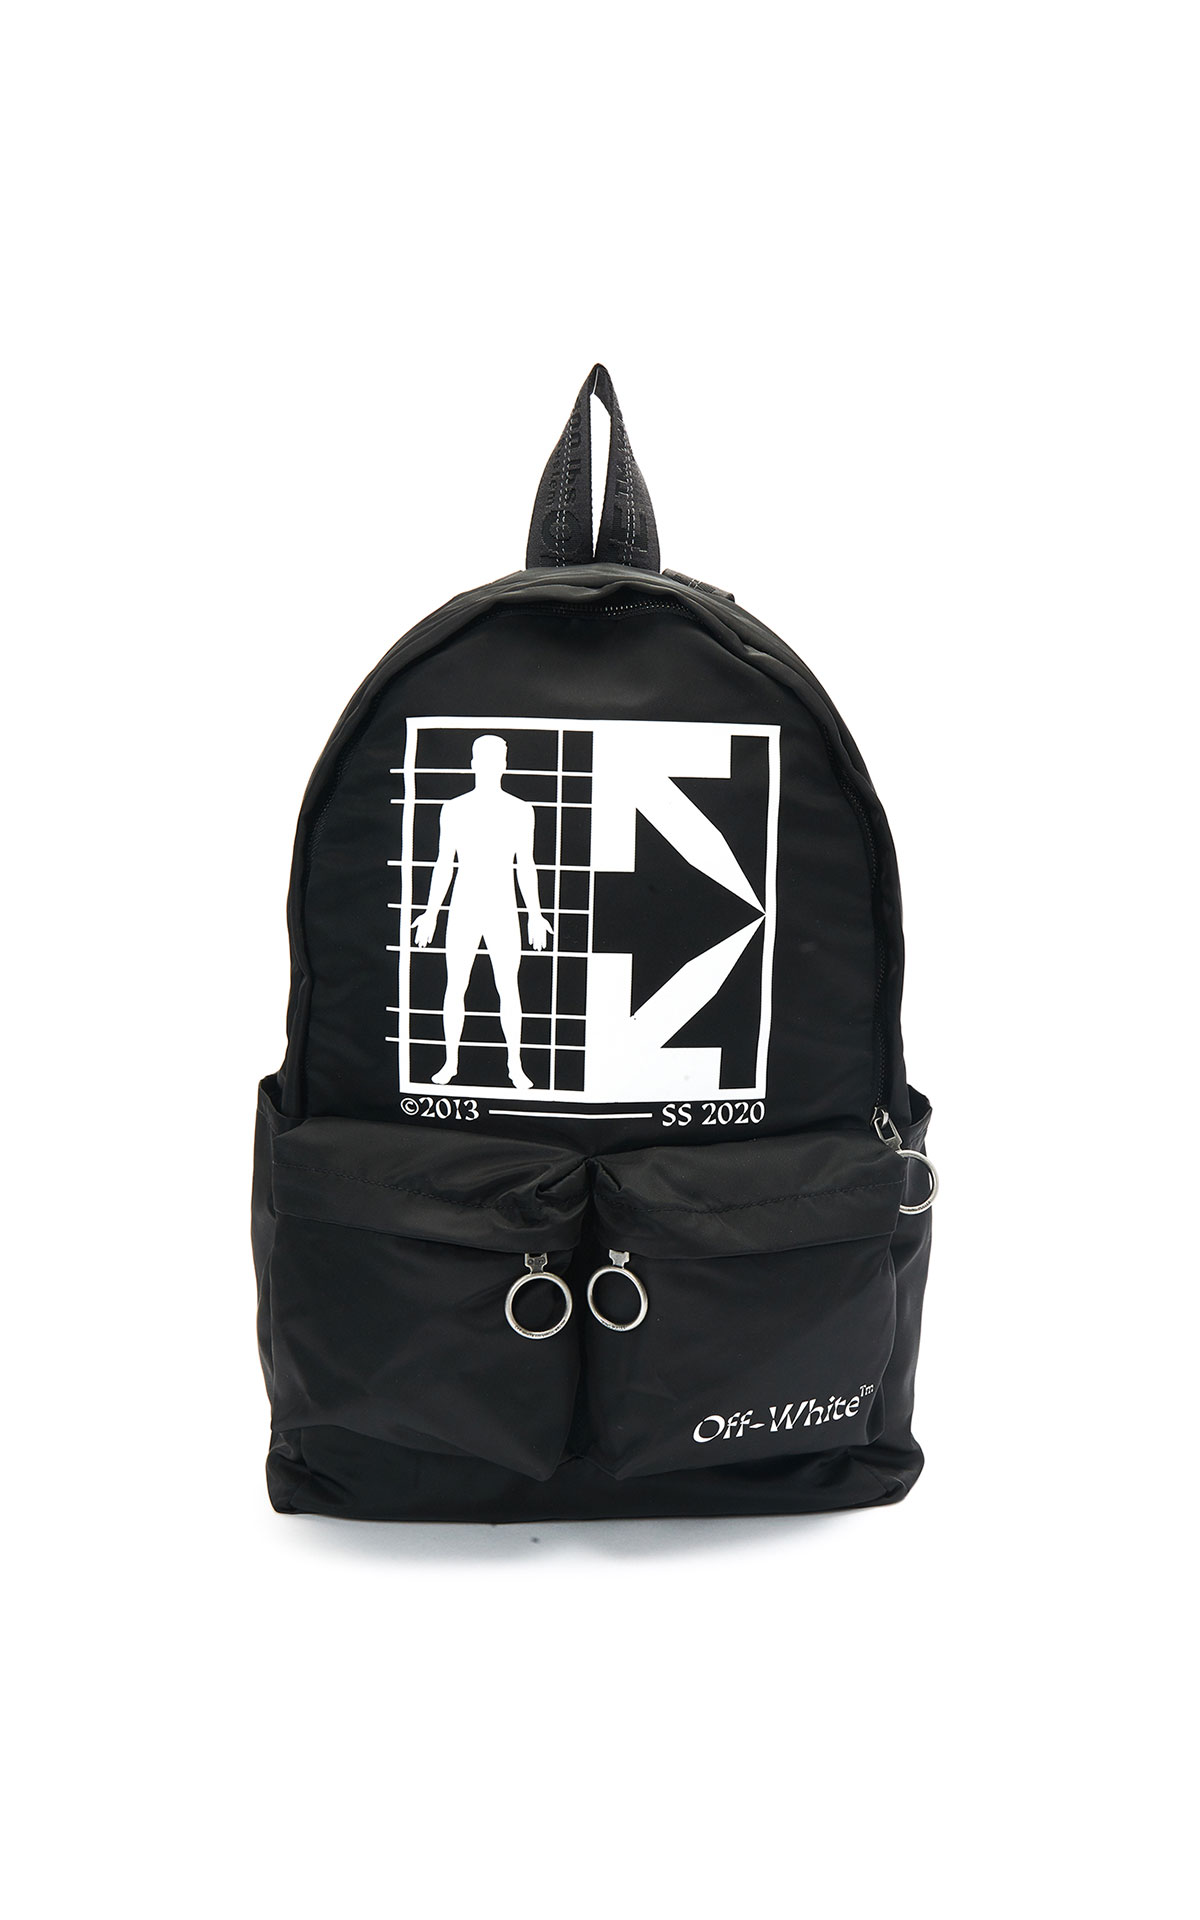 Off-White Half arrow man backpack black white from Bicester Village